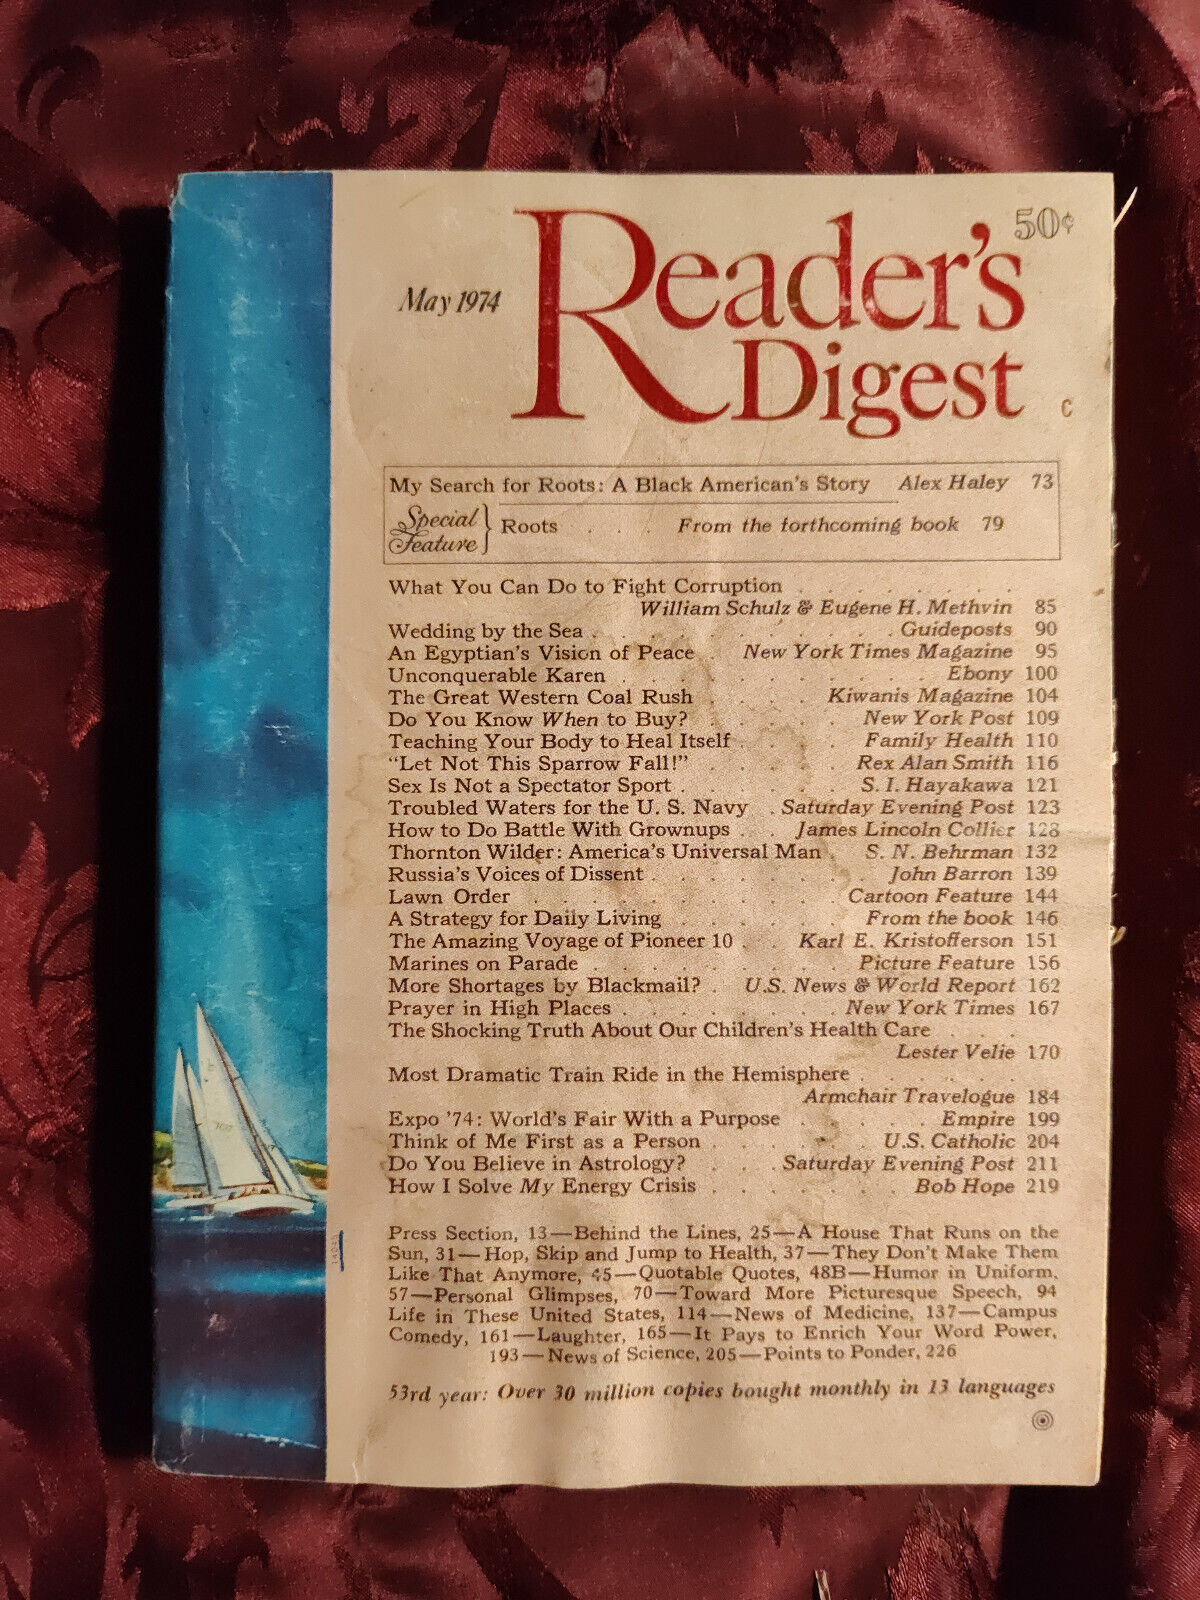 Primary image for Readers Digest May 1974 John Barron Bob Hope Alex Haley Roots Thornton Wilder